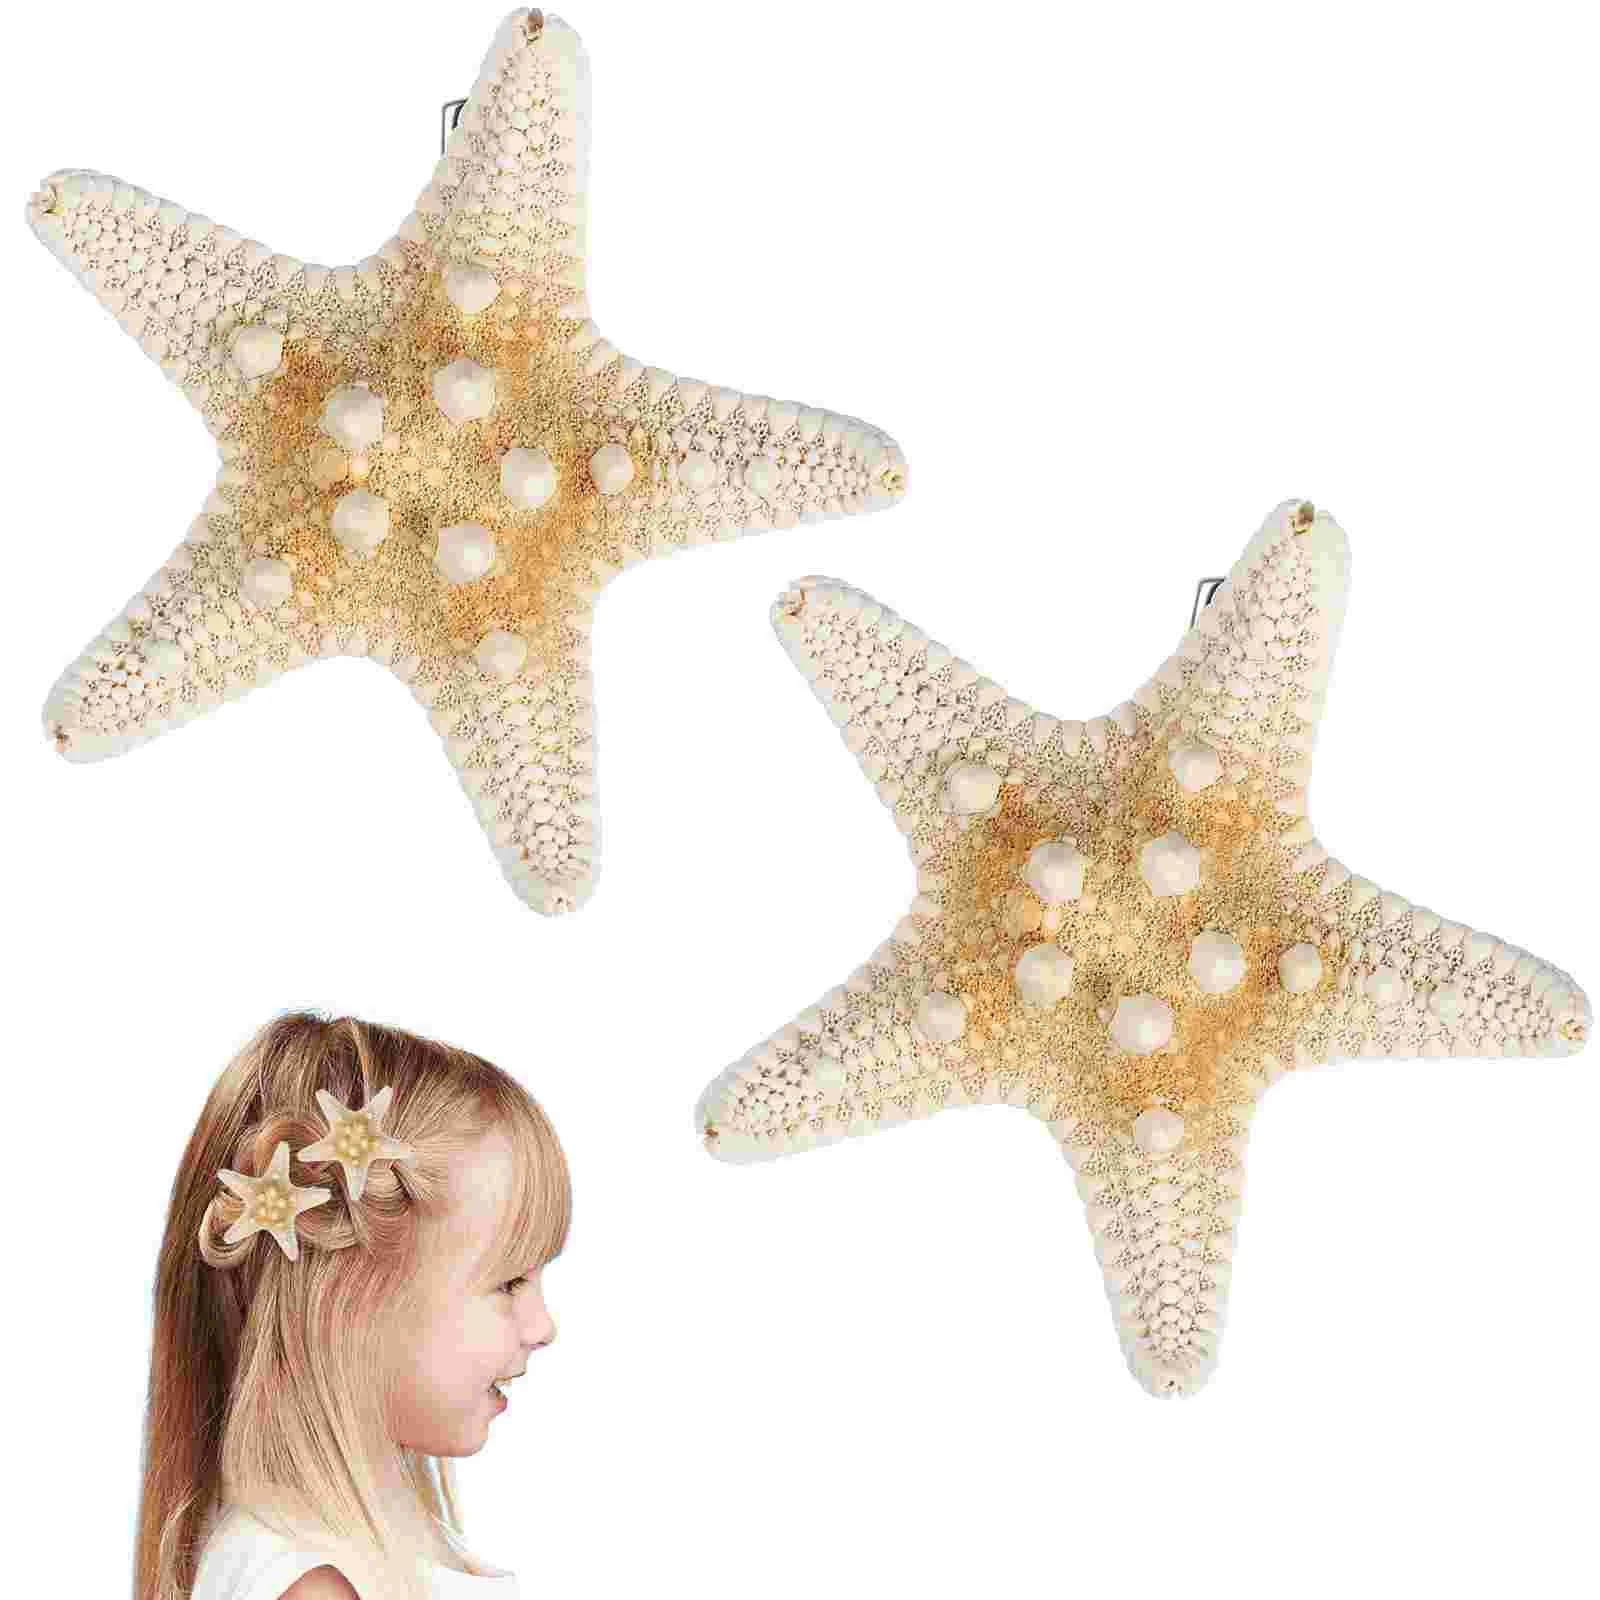 

2 Pcs Frcolor Handmade Natural Starfish Hair Clips 2pcs/pack Five-pointed Hairpin Accessories Small Styling Clamps Miss